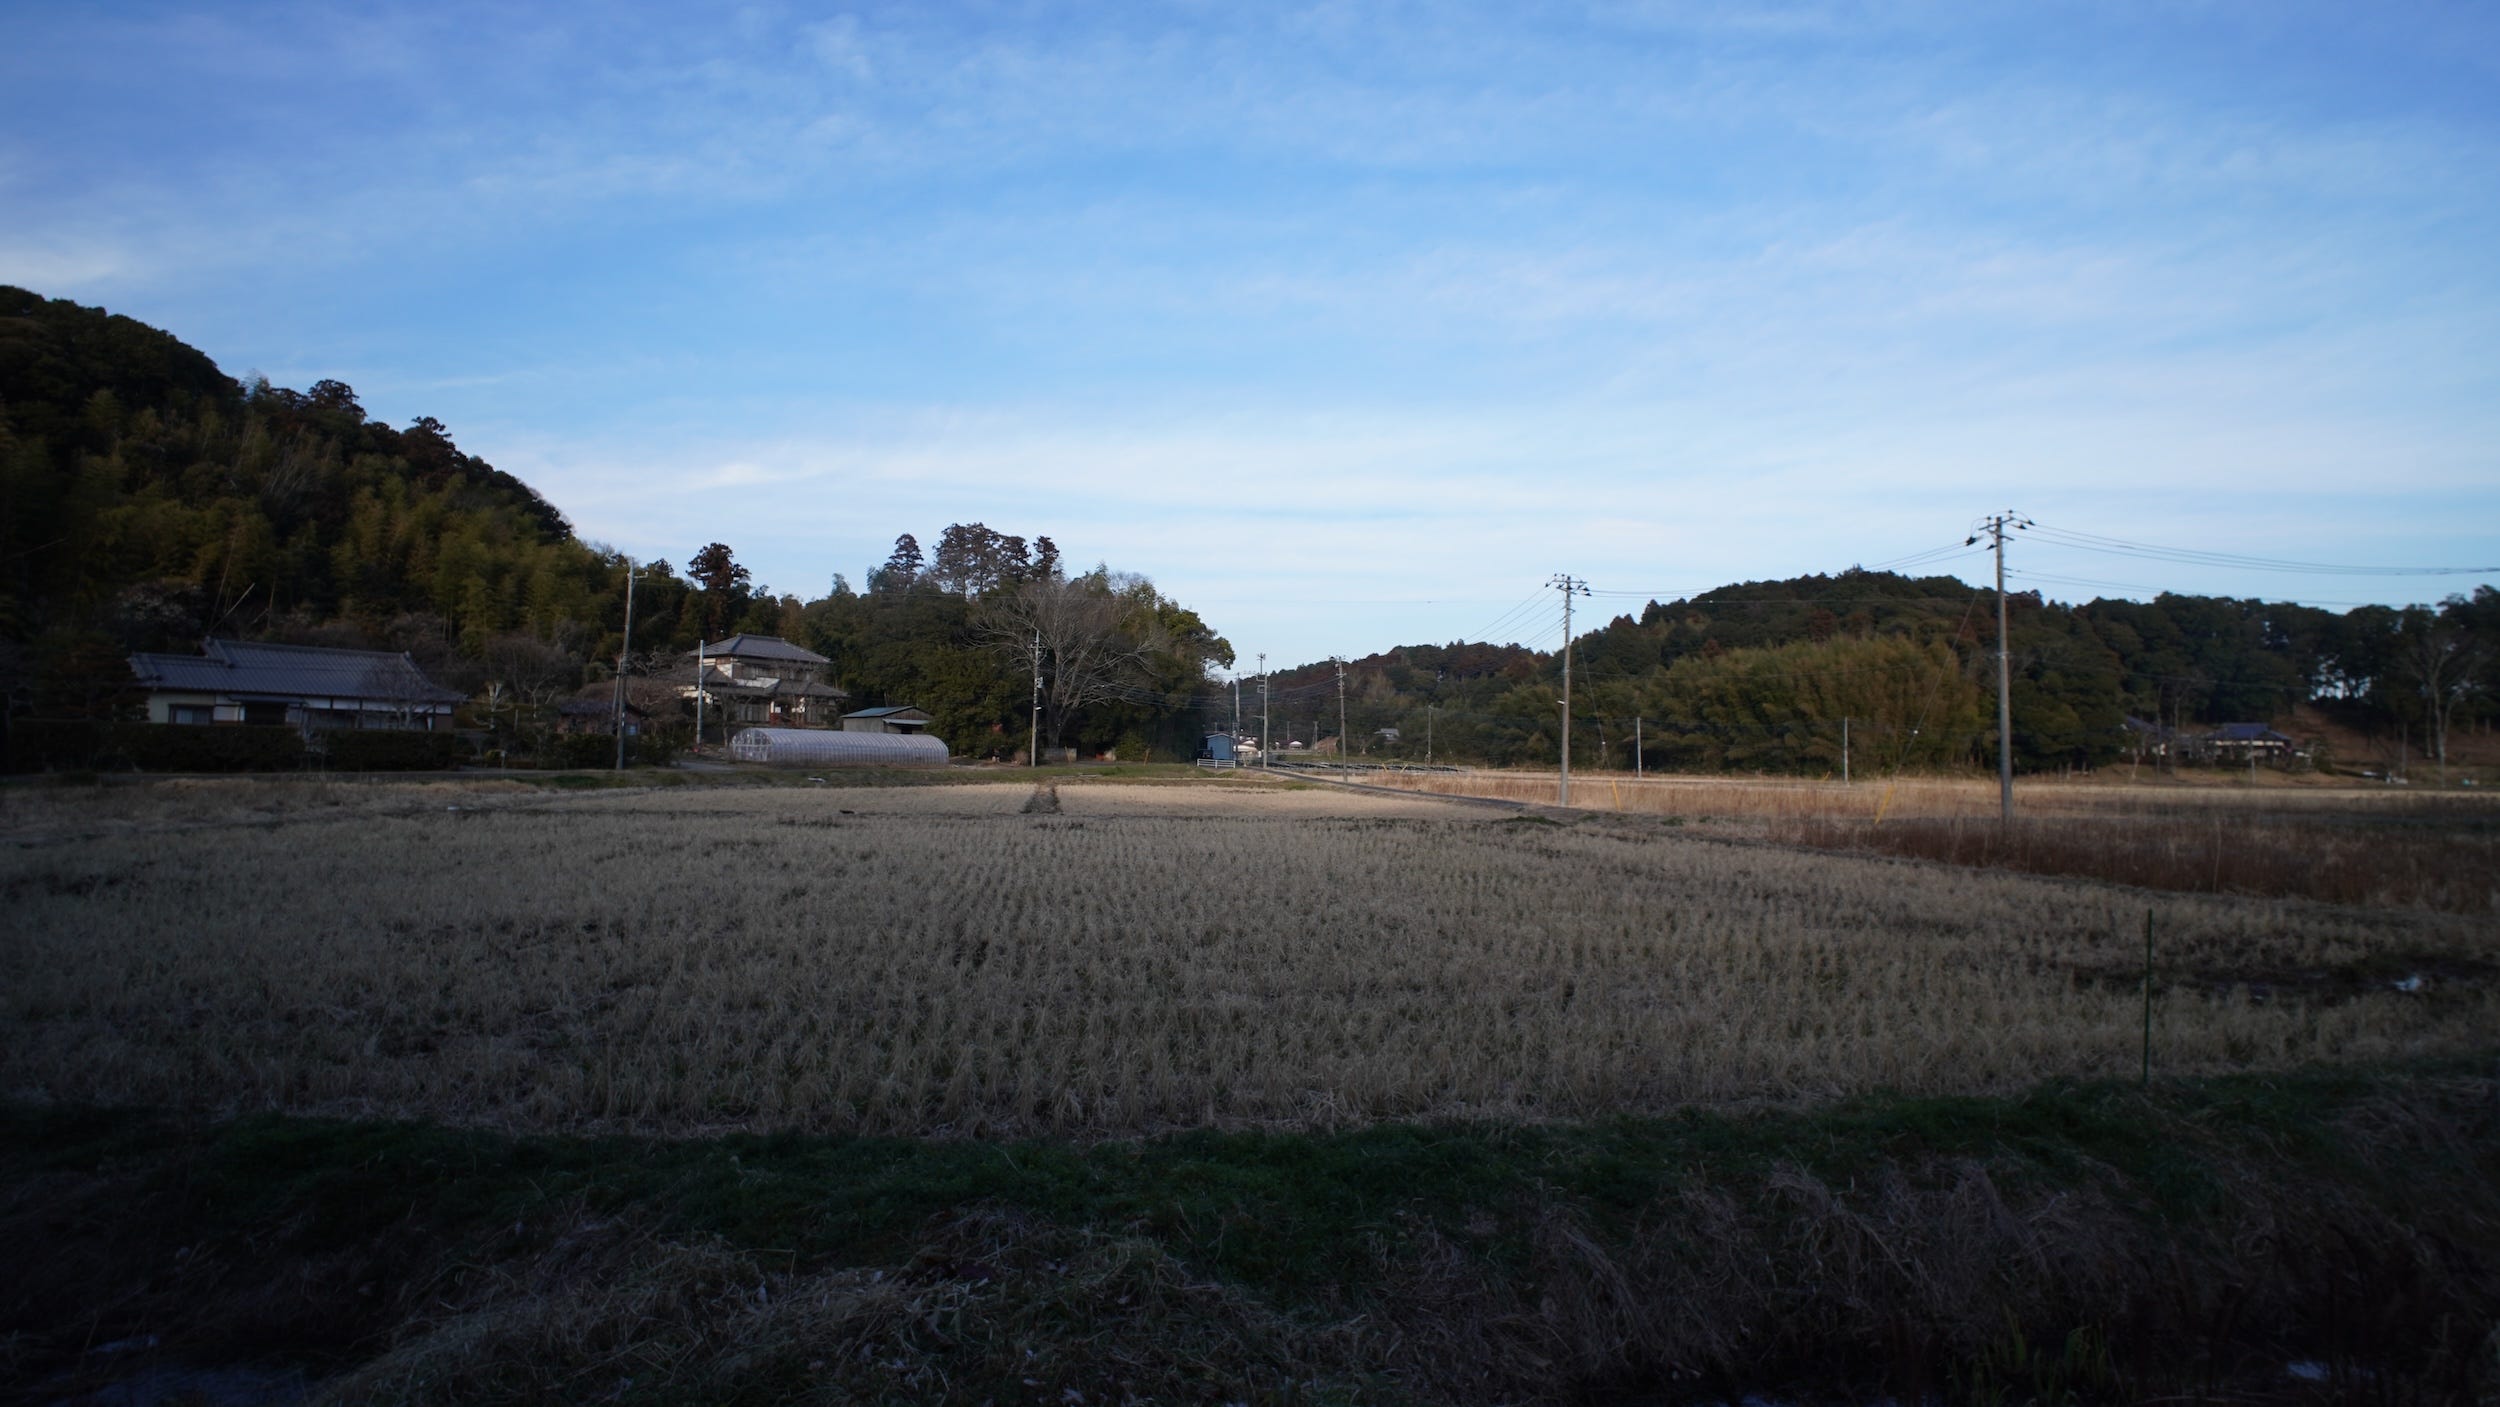 i bought a house in japan for less than $45,000. i live in the peaceful countryside close to every convenience, and everything's cheaper here.